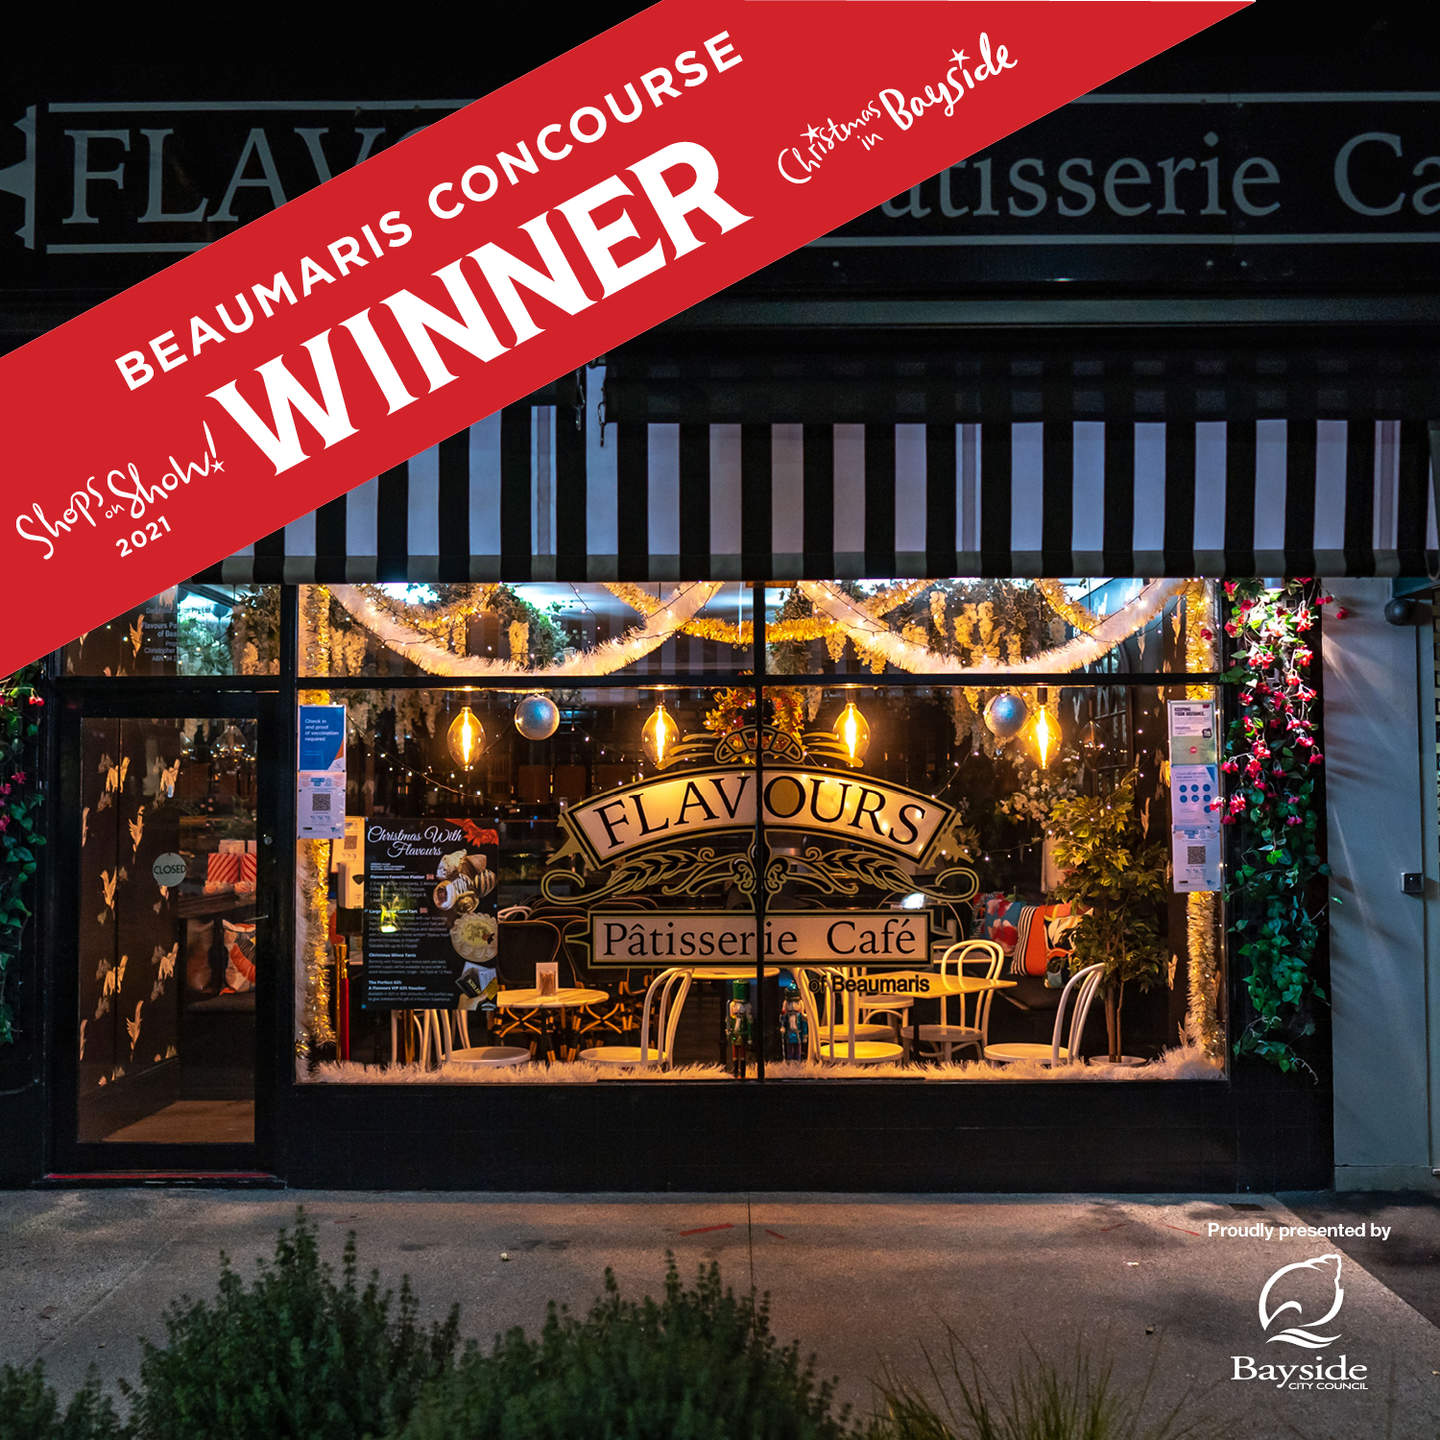 Shops on Show Beaumaris Concourse winner. Window shopfront of Flavours Patisserie Cafe decorated with tinsel, baubles and handing yellow lights.